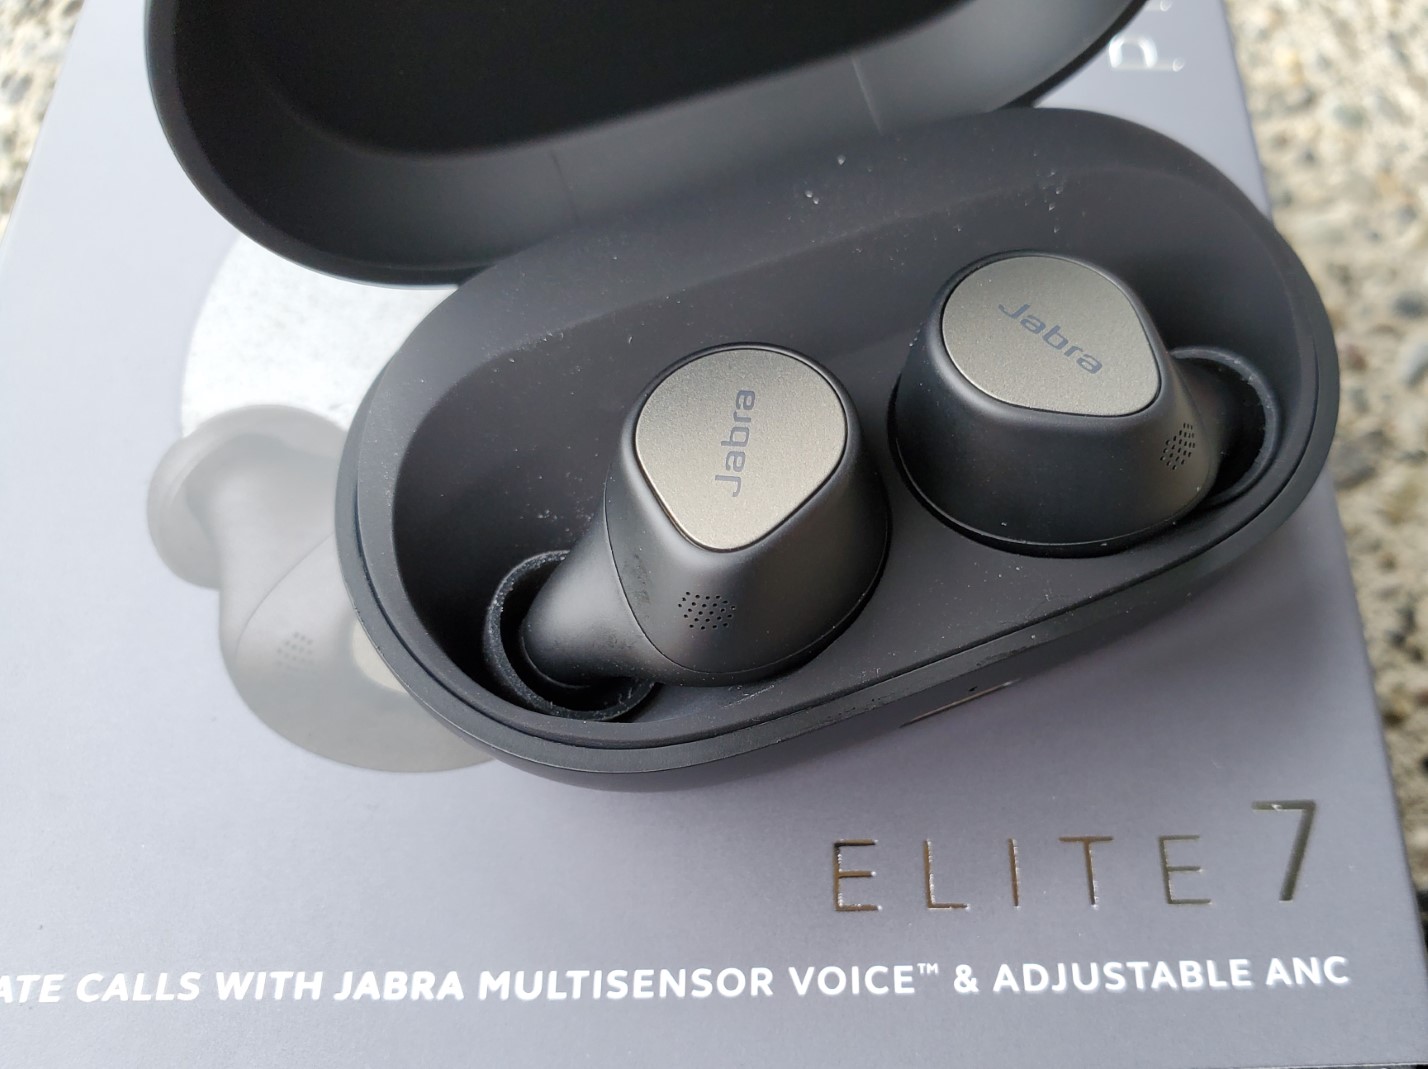 Jabra Elite 5 Review - Compact And Affordable But You've Seen It